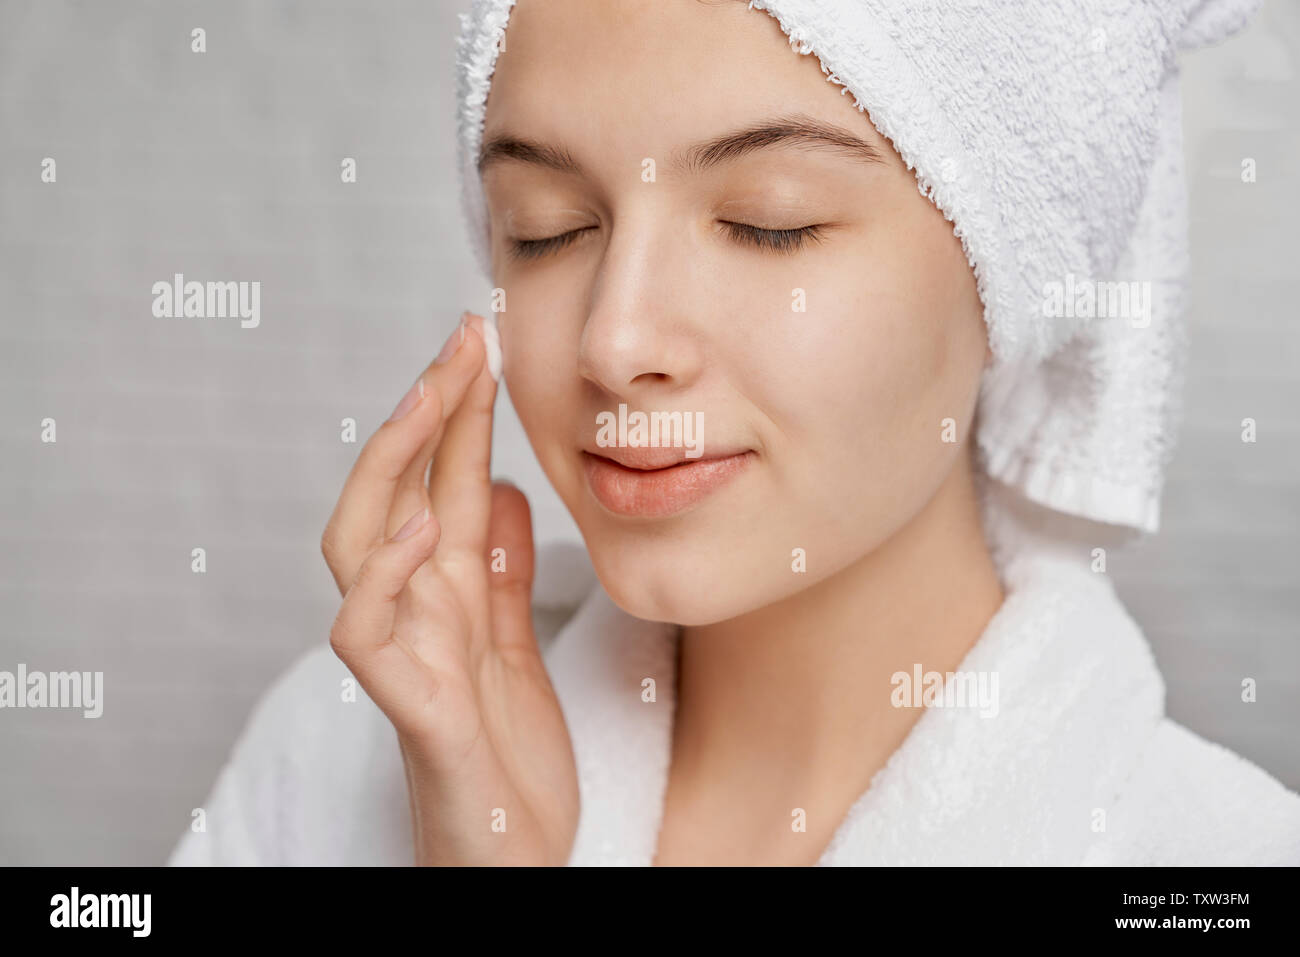 Close up of young, attractive woman with closed eyes applying moisturizer on face. Pretty girl with perfect skin in white bathrobe with white towel posing on grey background. Stock Photo